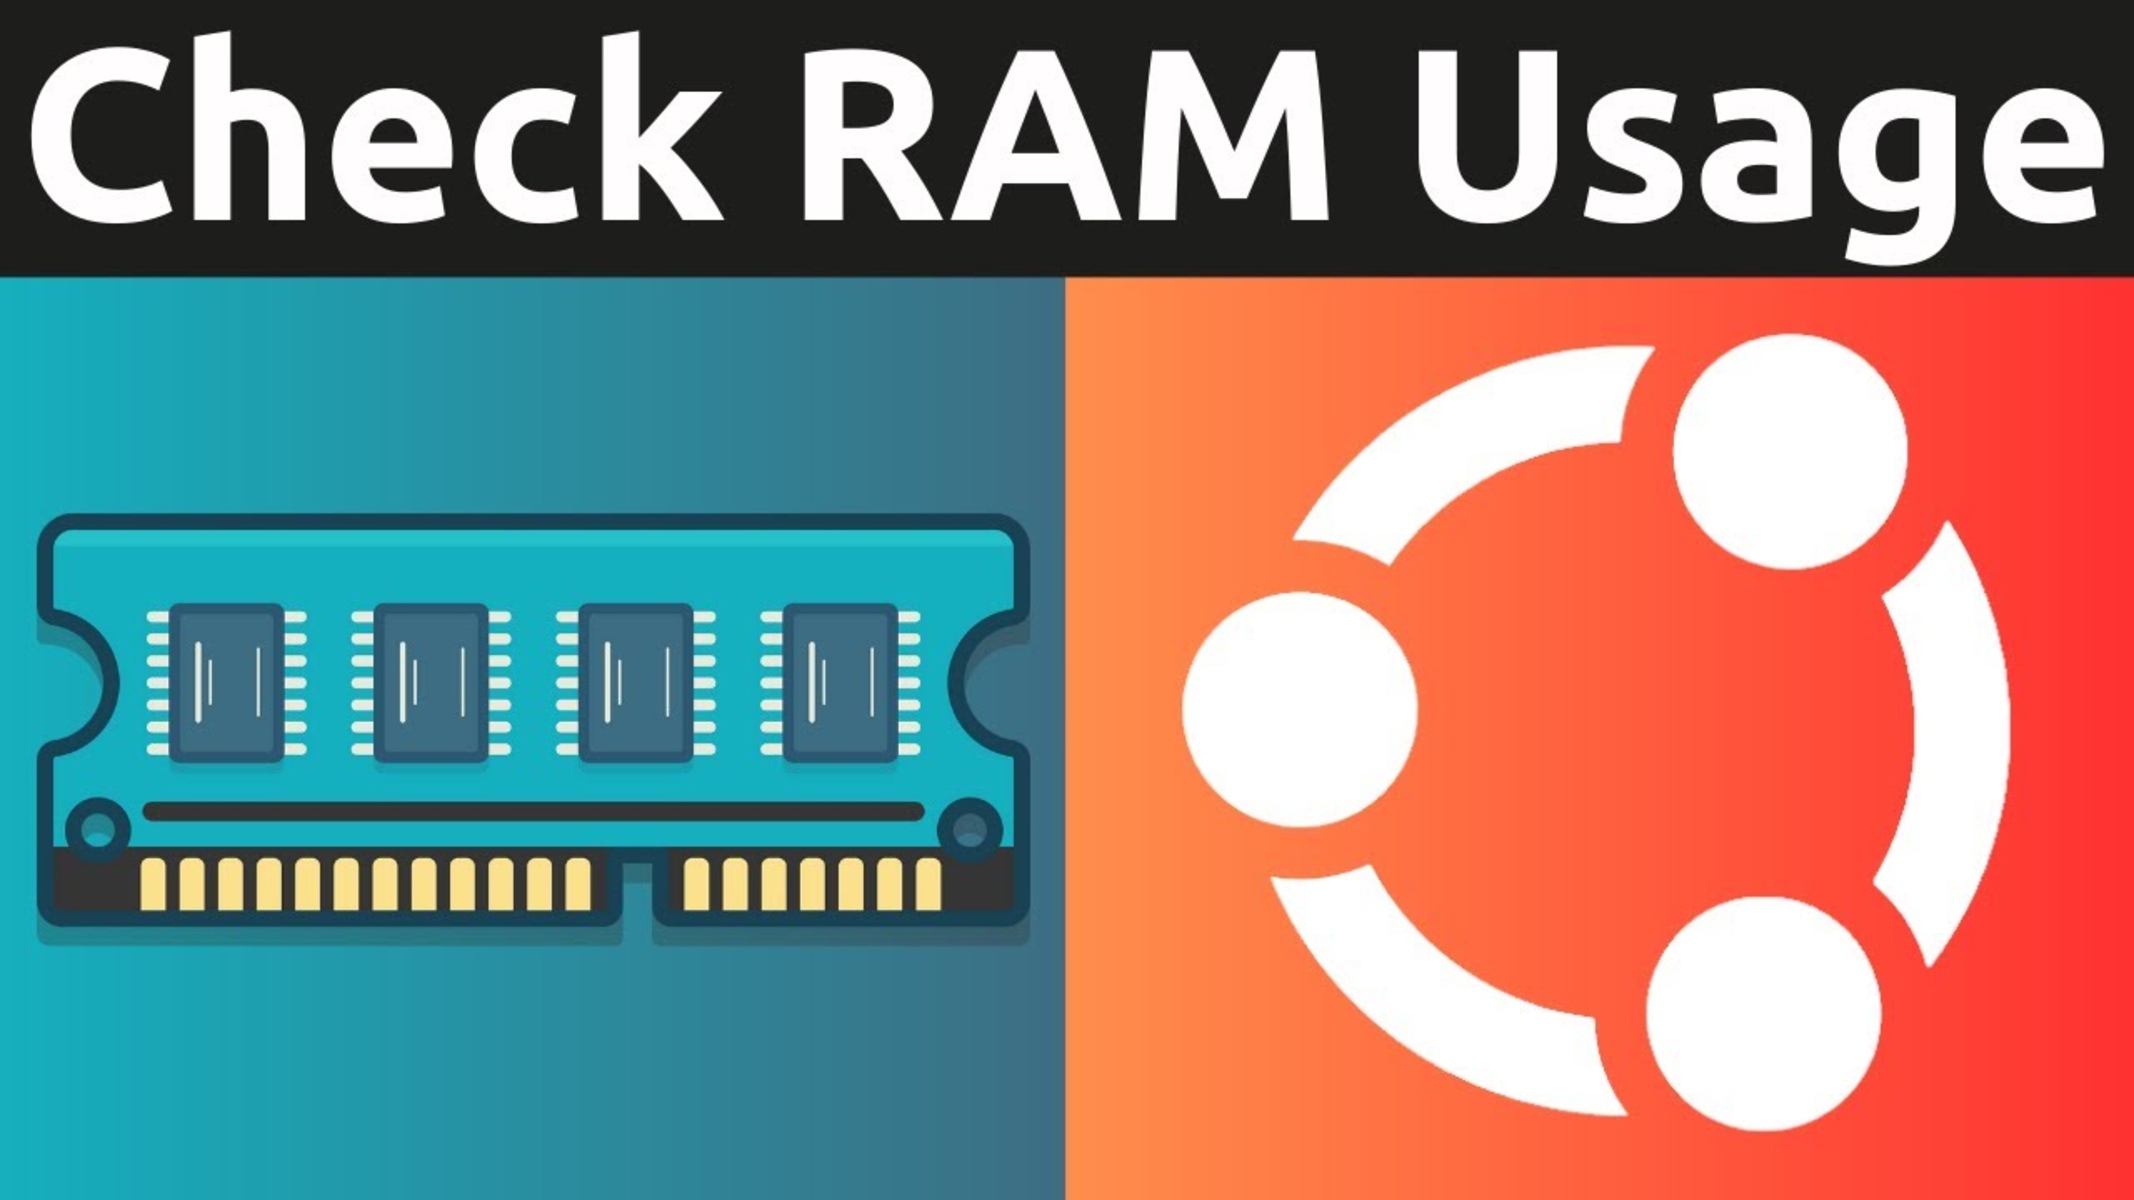 Check How Much RAM Linux Has